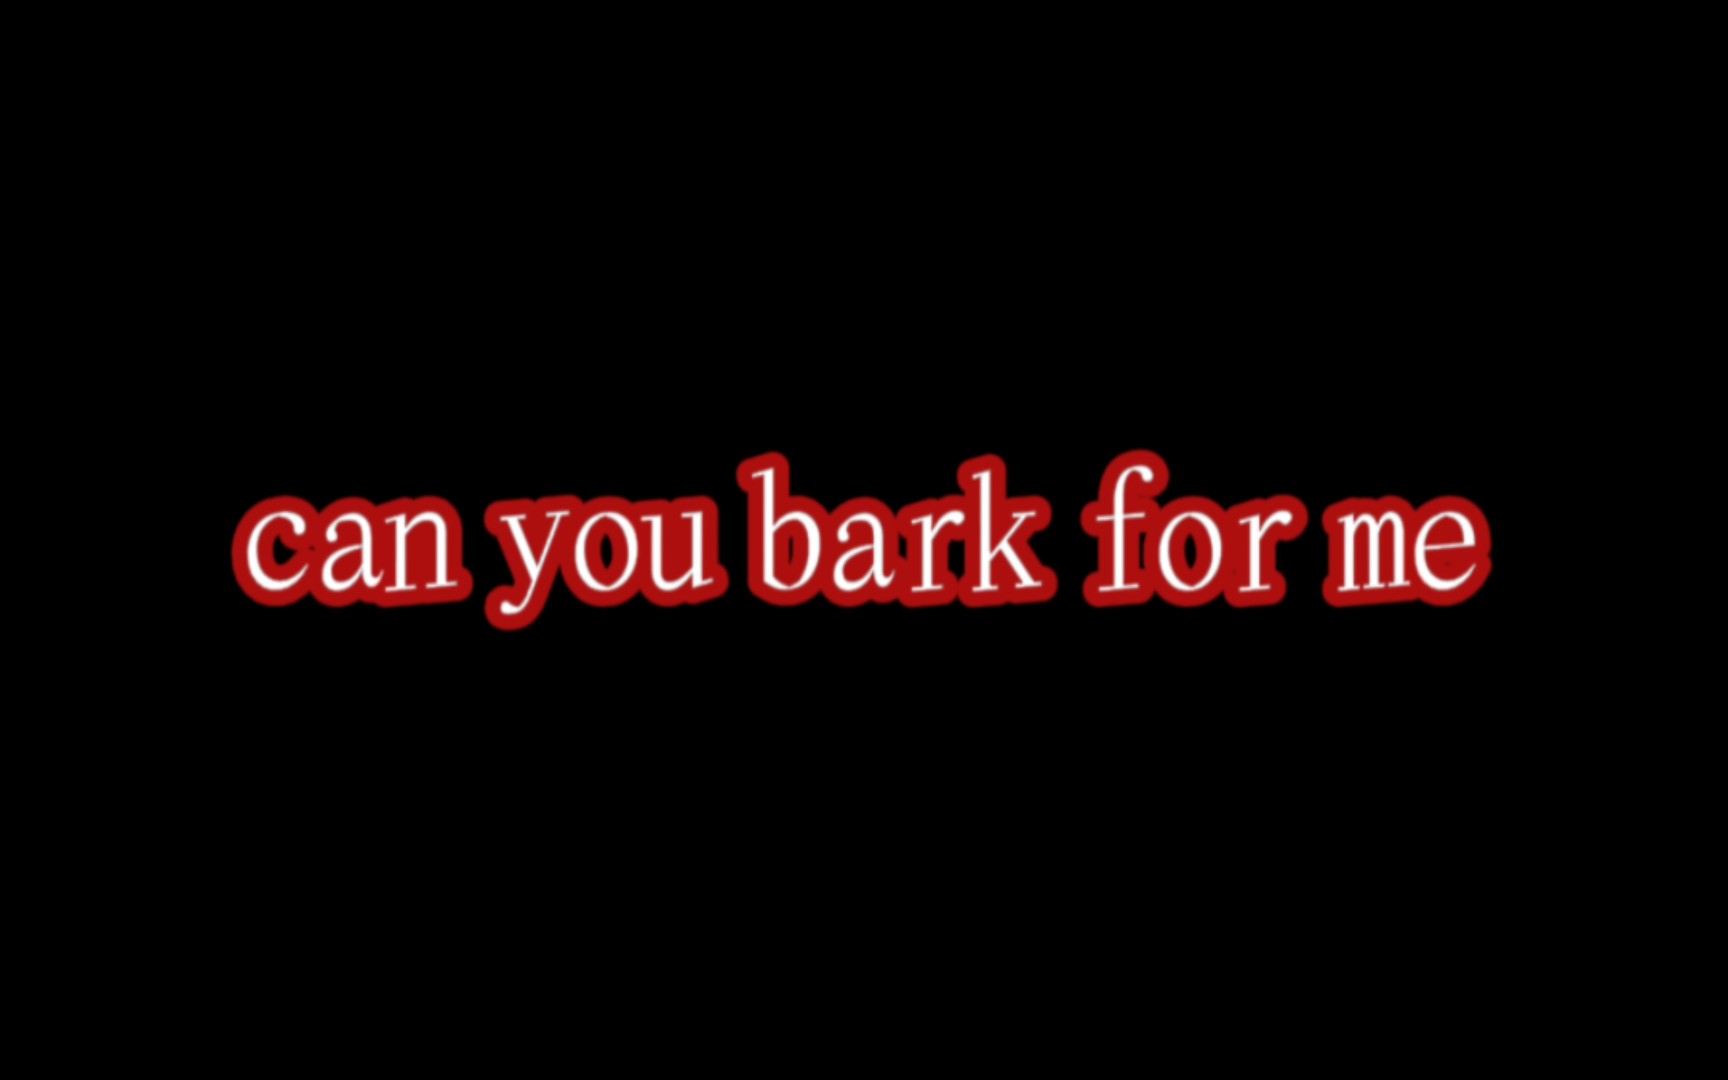 【vox/剧情向/瑟瑟】can you bark for me？